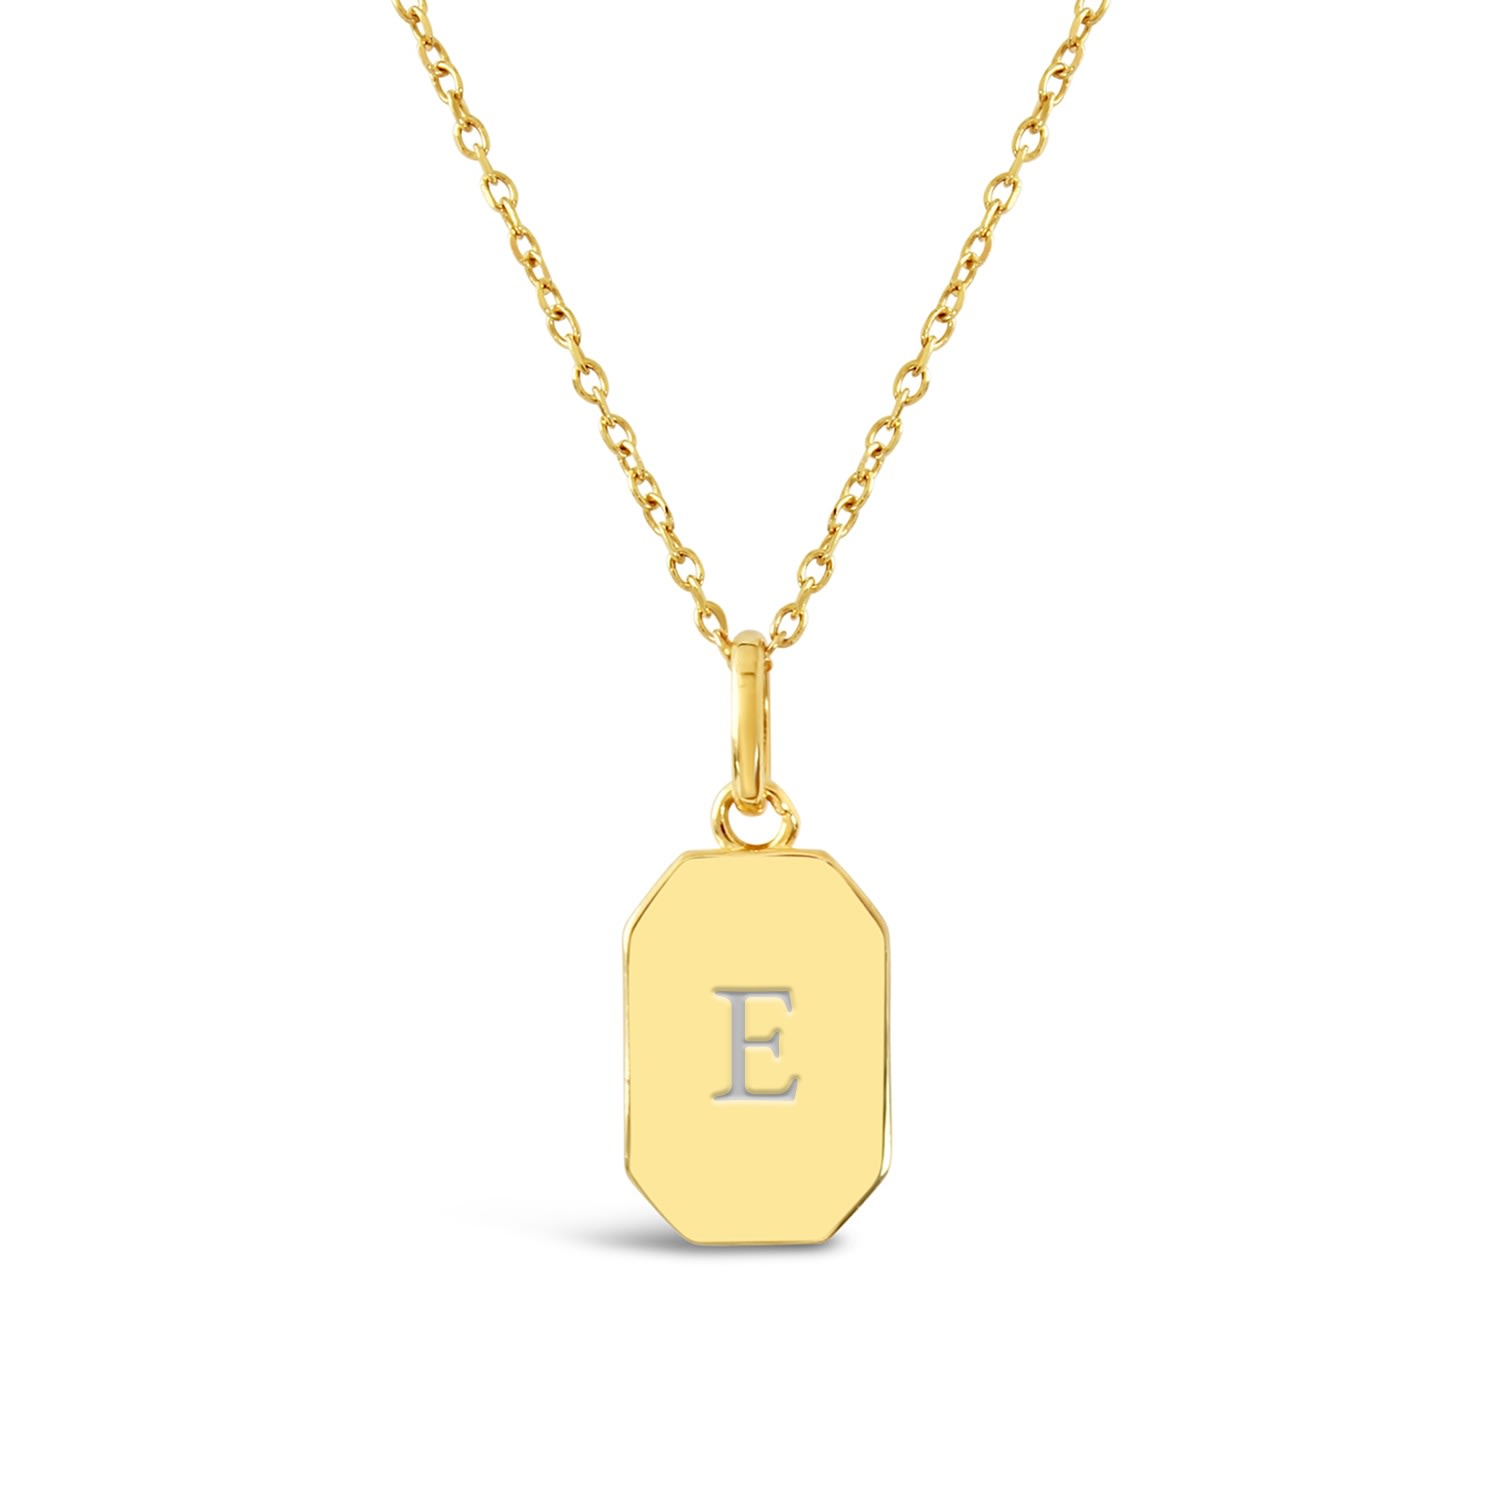 Women’s Mini Tag 18K Gold Vermeil Necklace - Minimal Initial Engraving Lucky Eleven